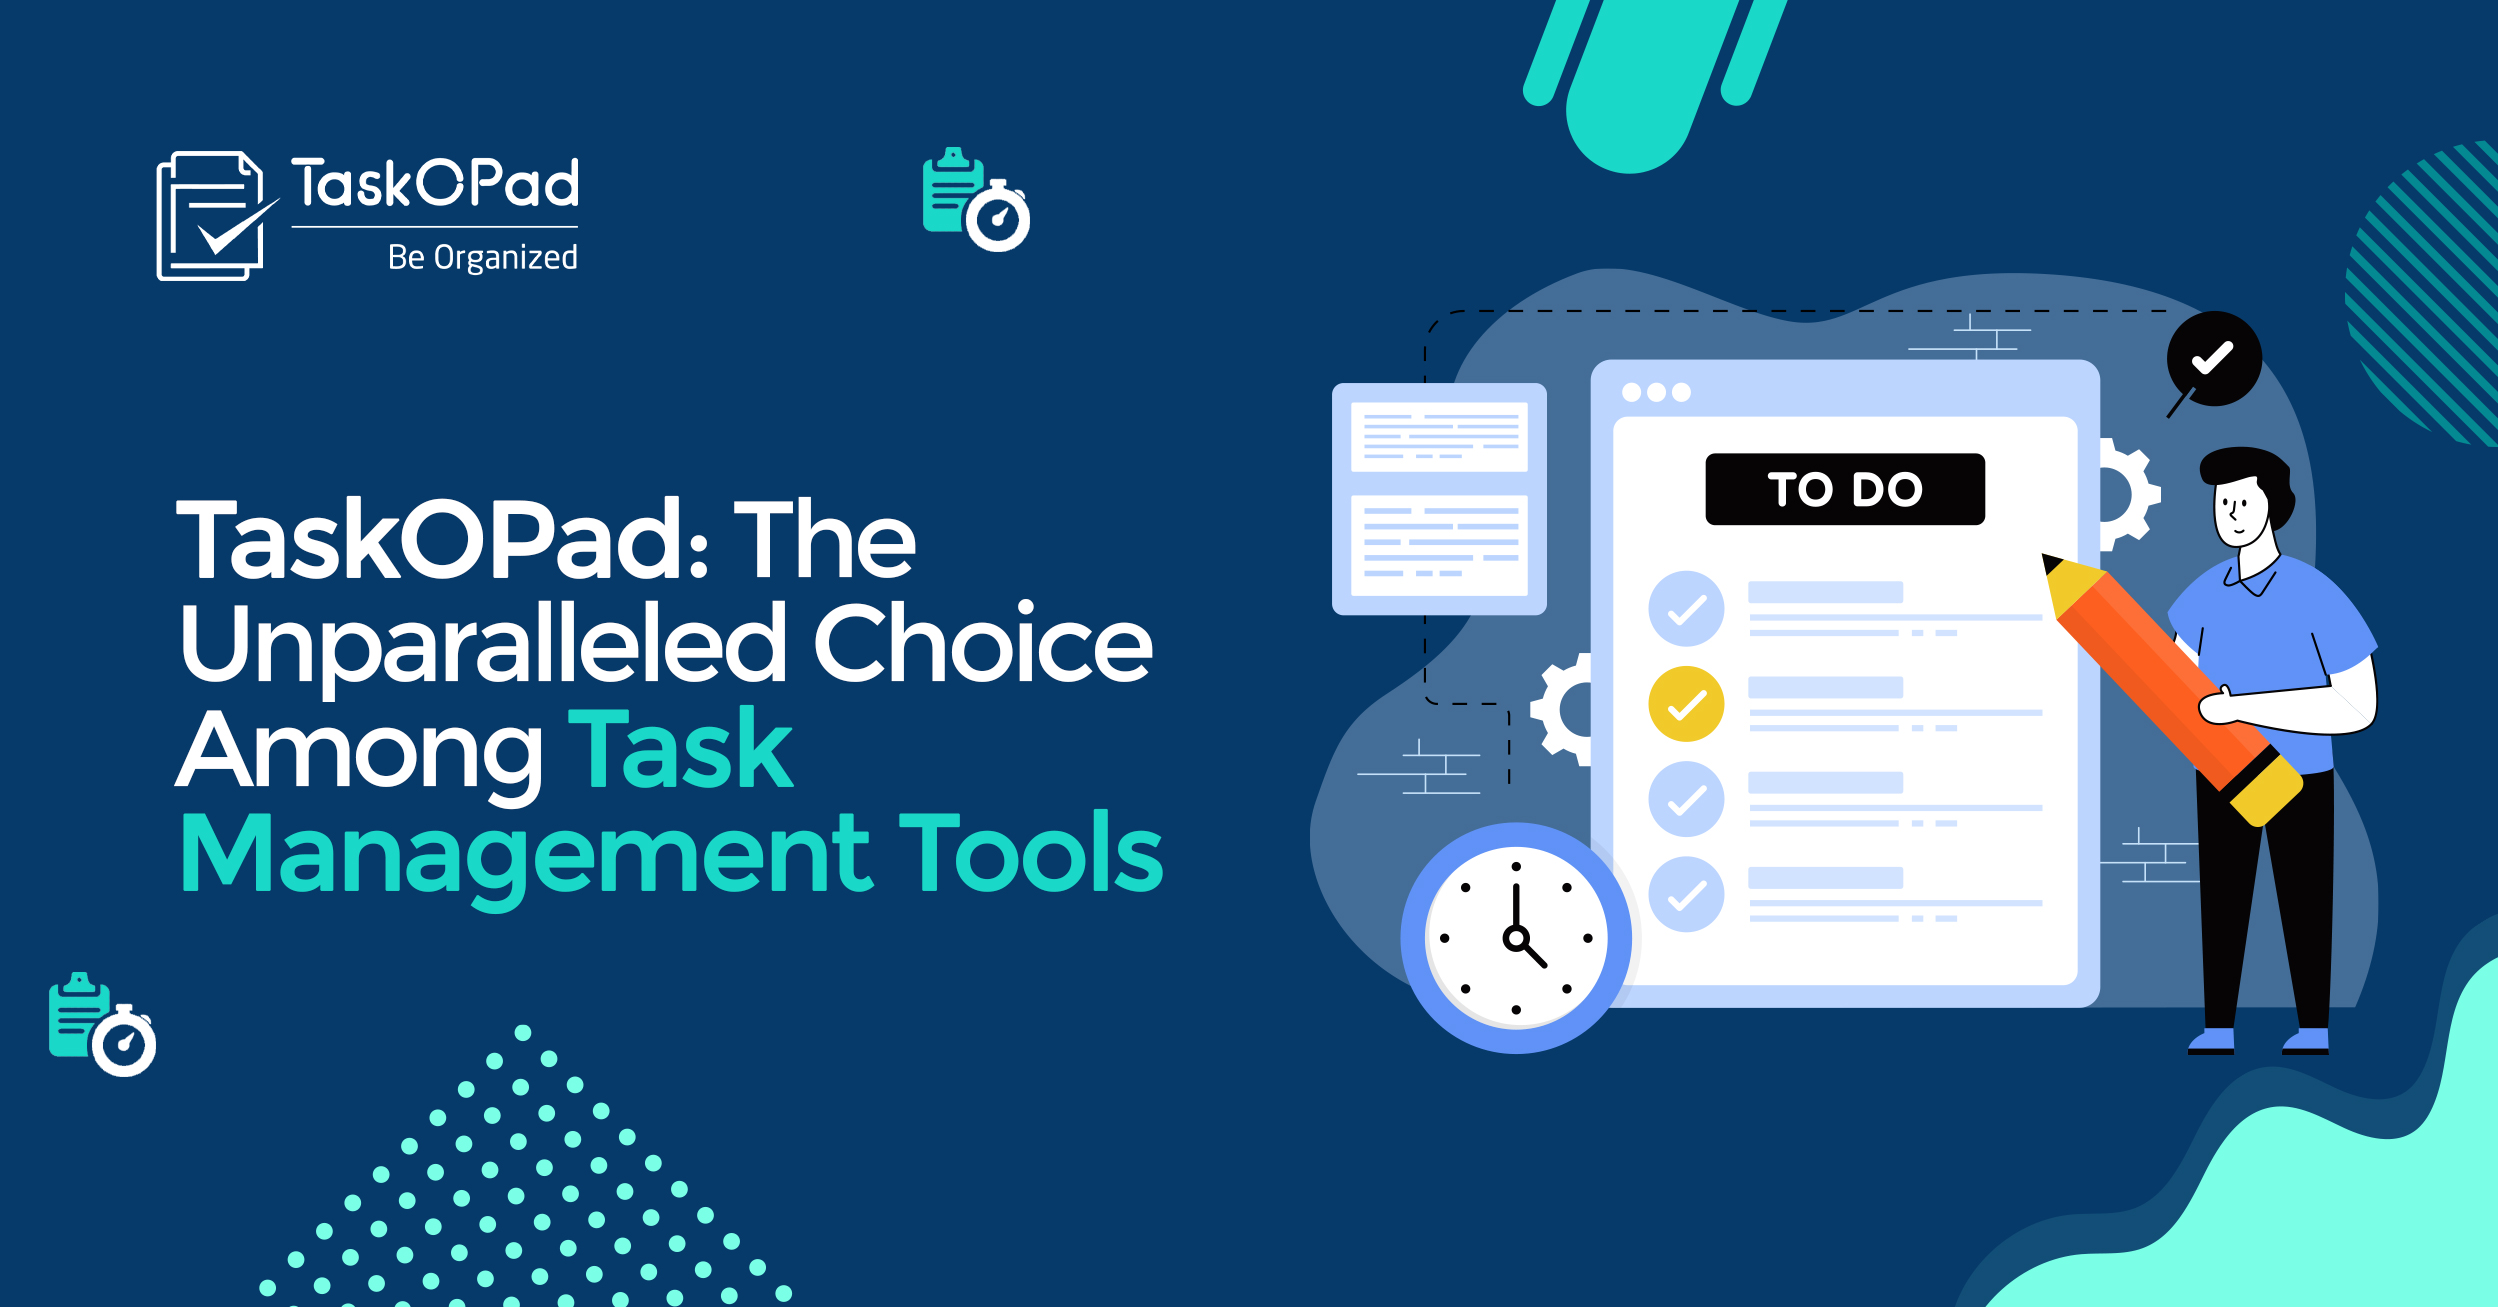 TaskOPad: The Unparalleled Choice Among Task Management Tools